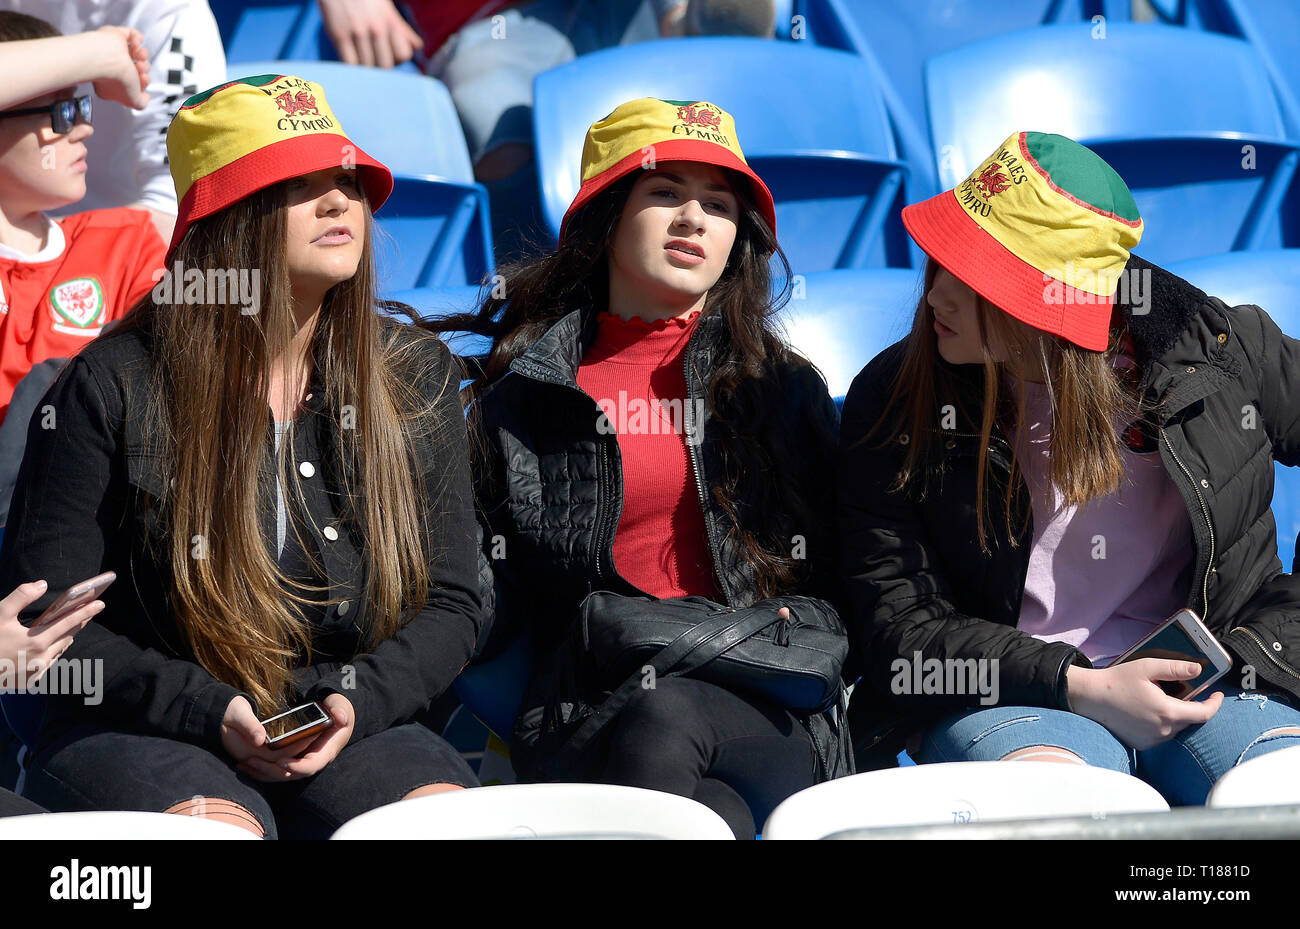 Cardiff, Wales, UK. 24th Mar 2019. Football, UEFA European Qualifiers Group E, Wales v Slovakia, 24/03/19, Cardiff City Stadium, K.O 2PM  Wales fans bask in glorious sunshine in their bucket hats at the Cardiff City Stadium ahead of this afternoons European Qualifier with Wales v Slovakia.  Andrew Dowling Credit: Andrew Dowling/Influential Photography/Alamy Live News Stock Photo